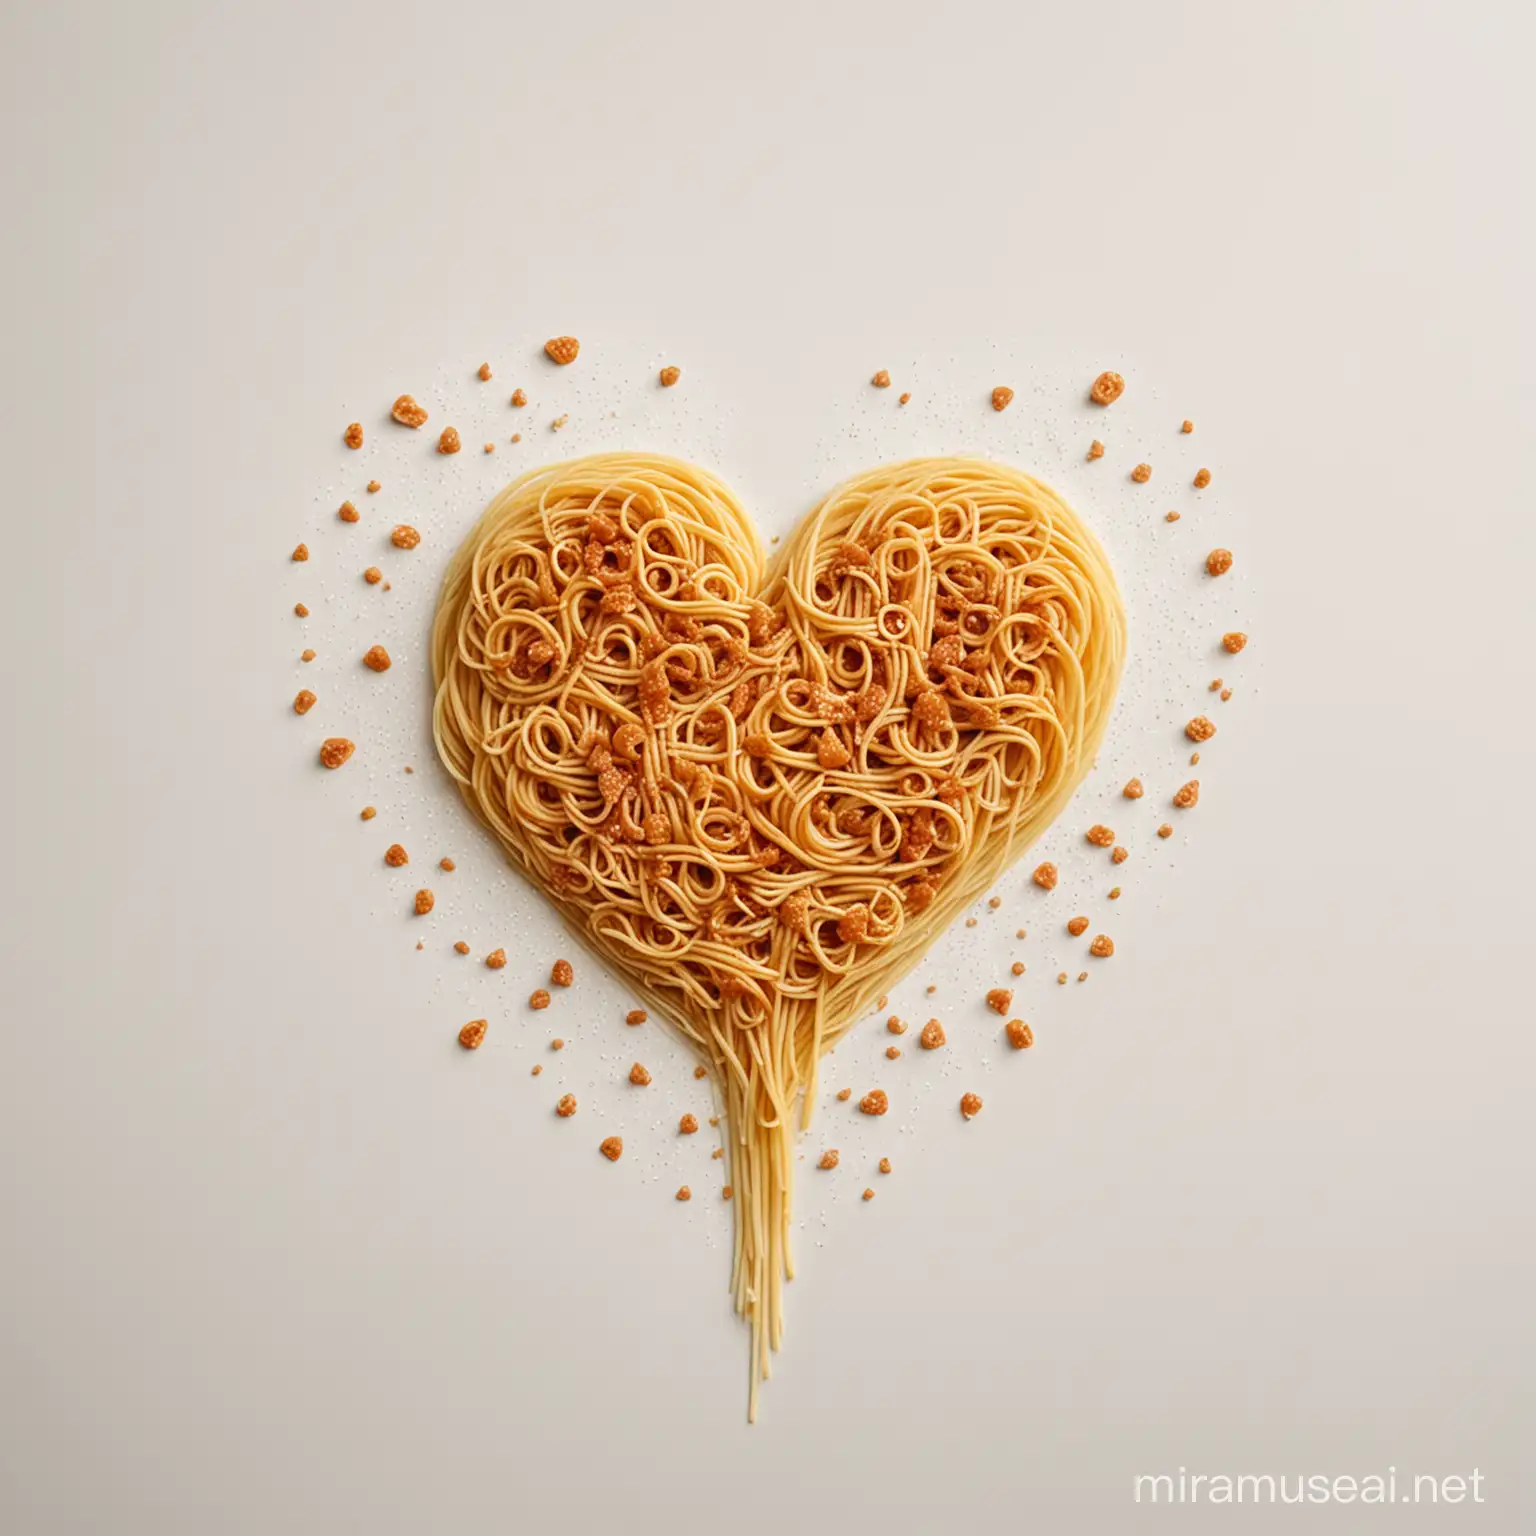 Spaghetti in the form of a Broken Heart, plain white background. Only one of them extends upwards from the top of the spaghetti 
